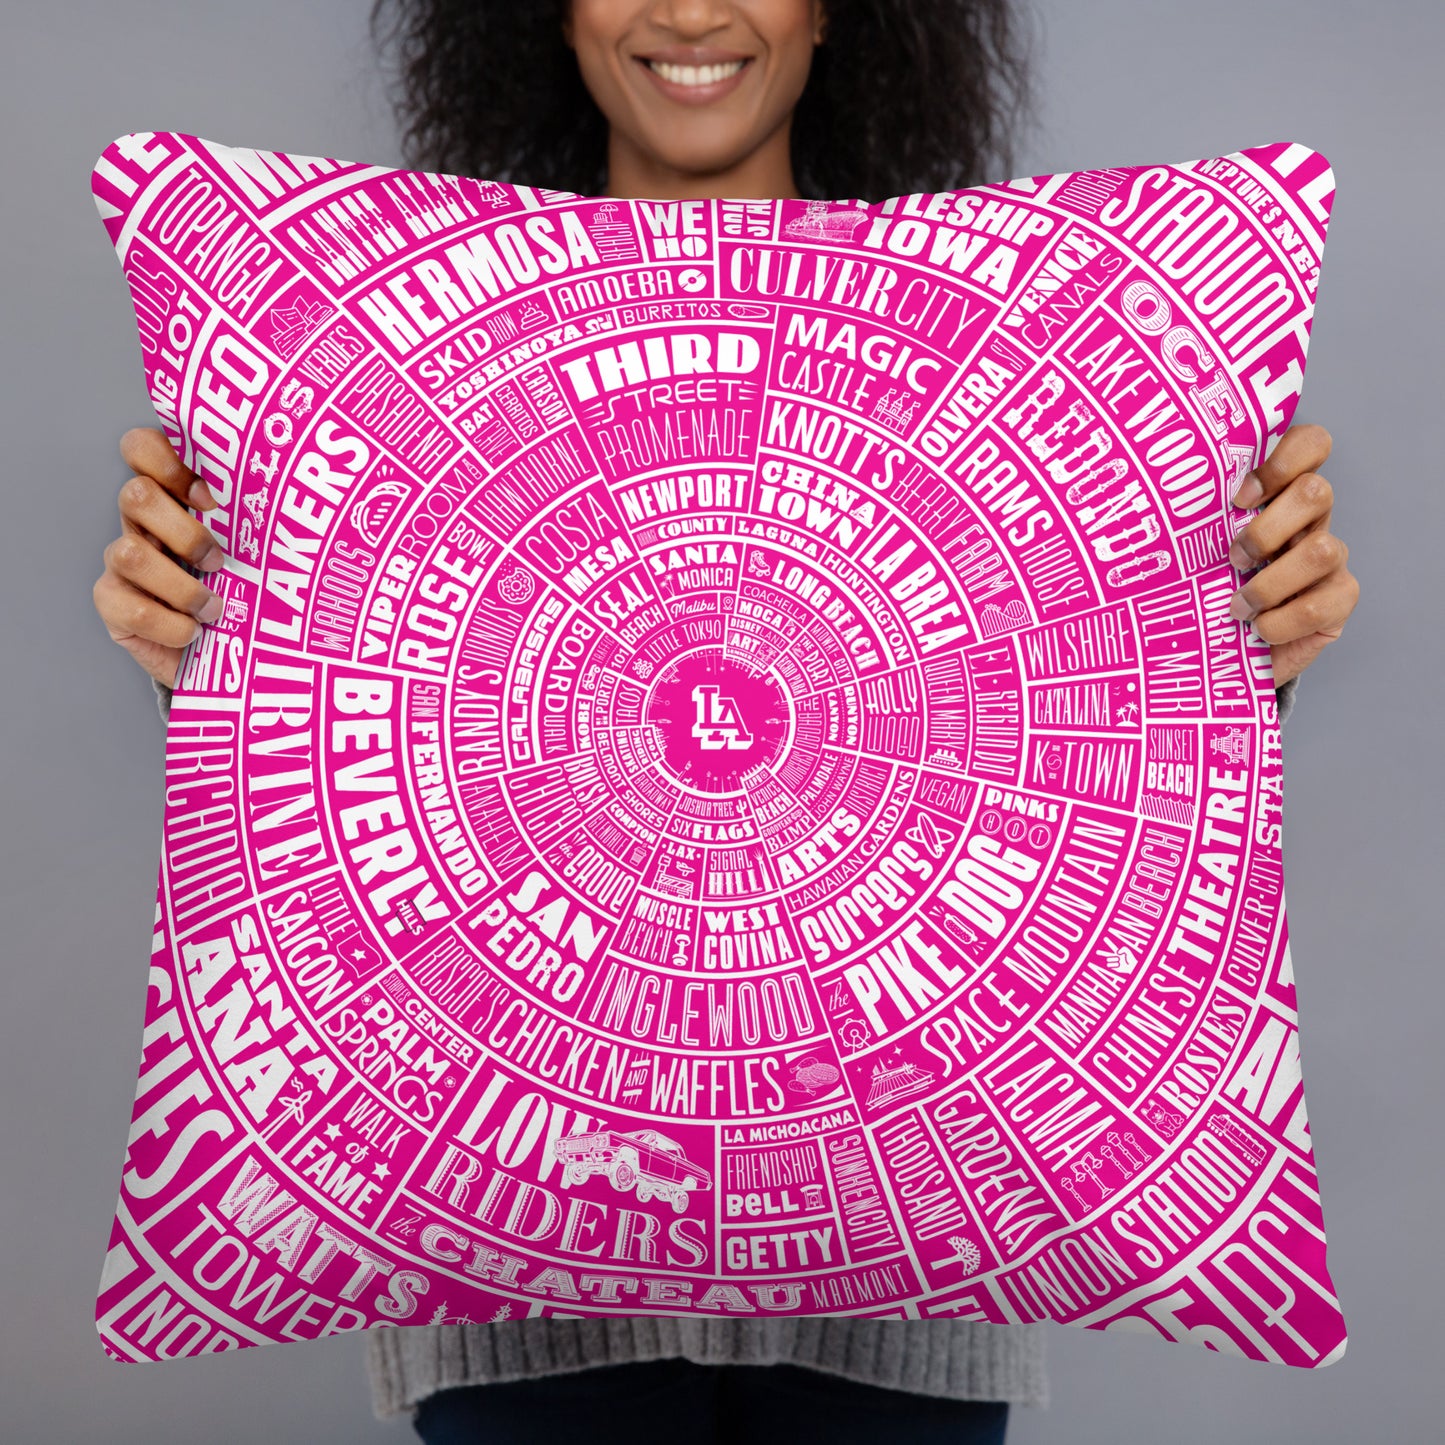 Los Angeles Type Wheel - Pillow - Pink Front & Black Back